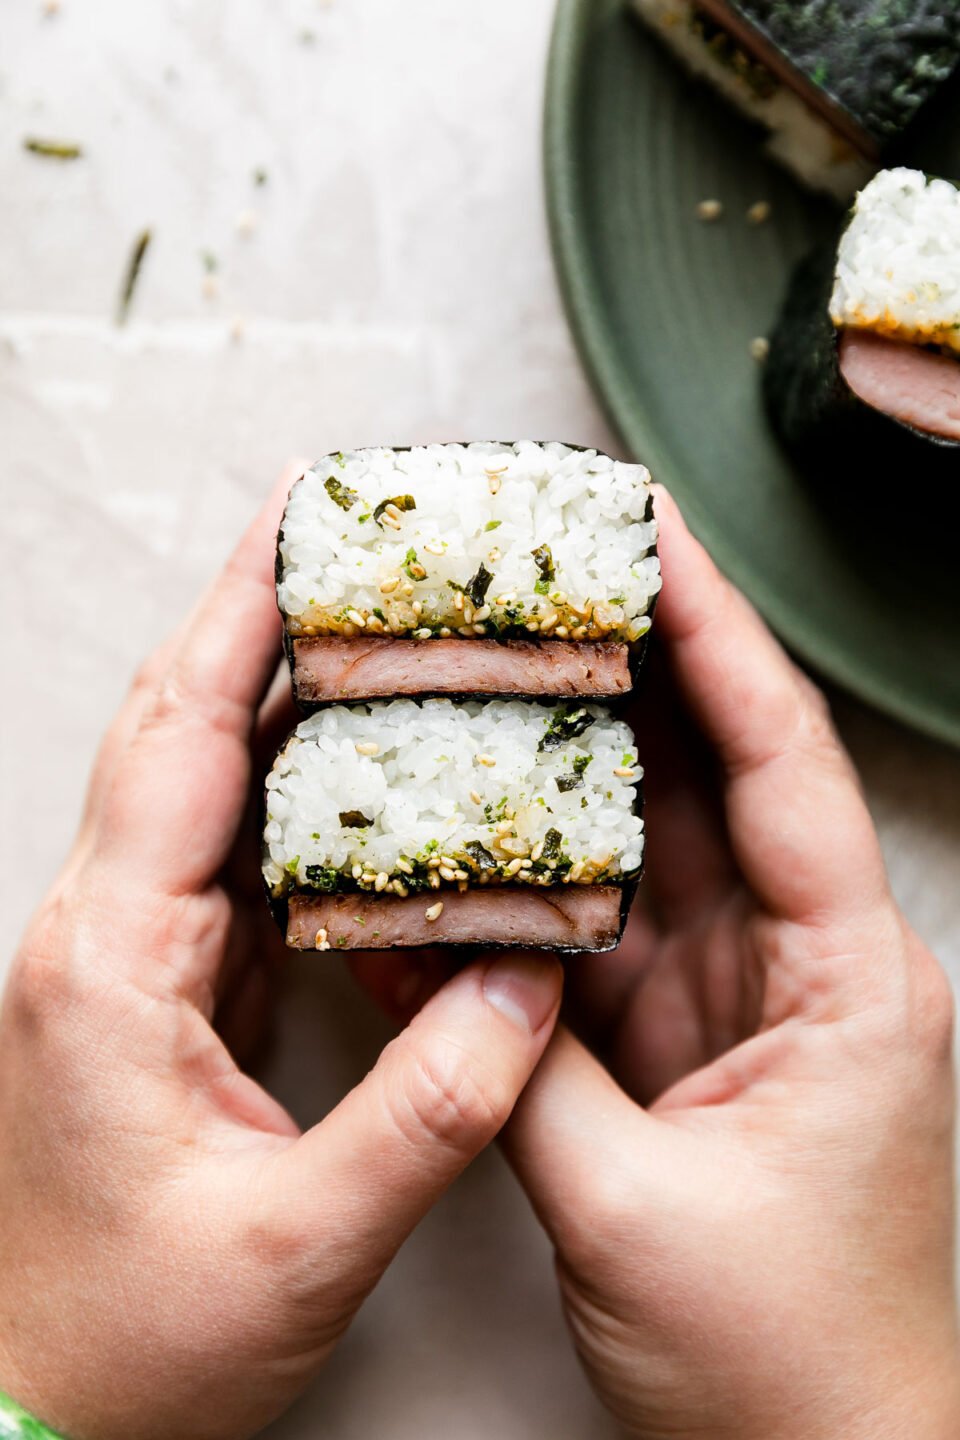 A woman's hands hold two stacked Hawaiian spam musubi above a creamy white textured surface. A green ceramic plate with additional musubi sits atop the creamy white textured surface slightly out of focus.